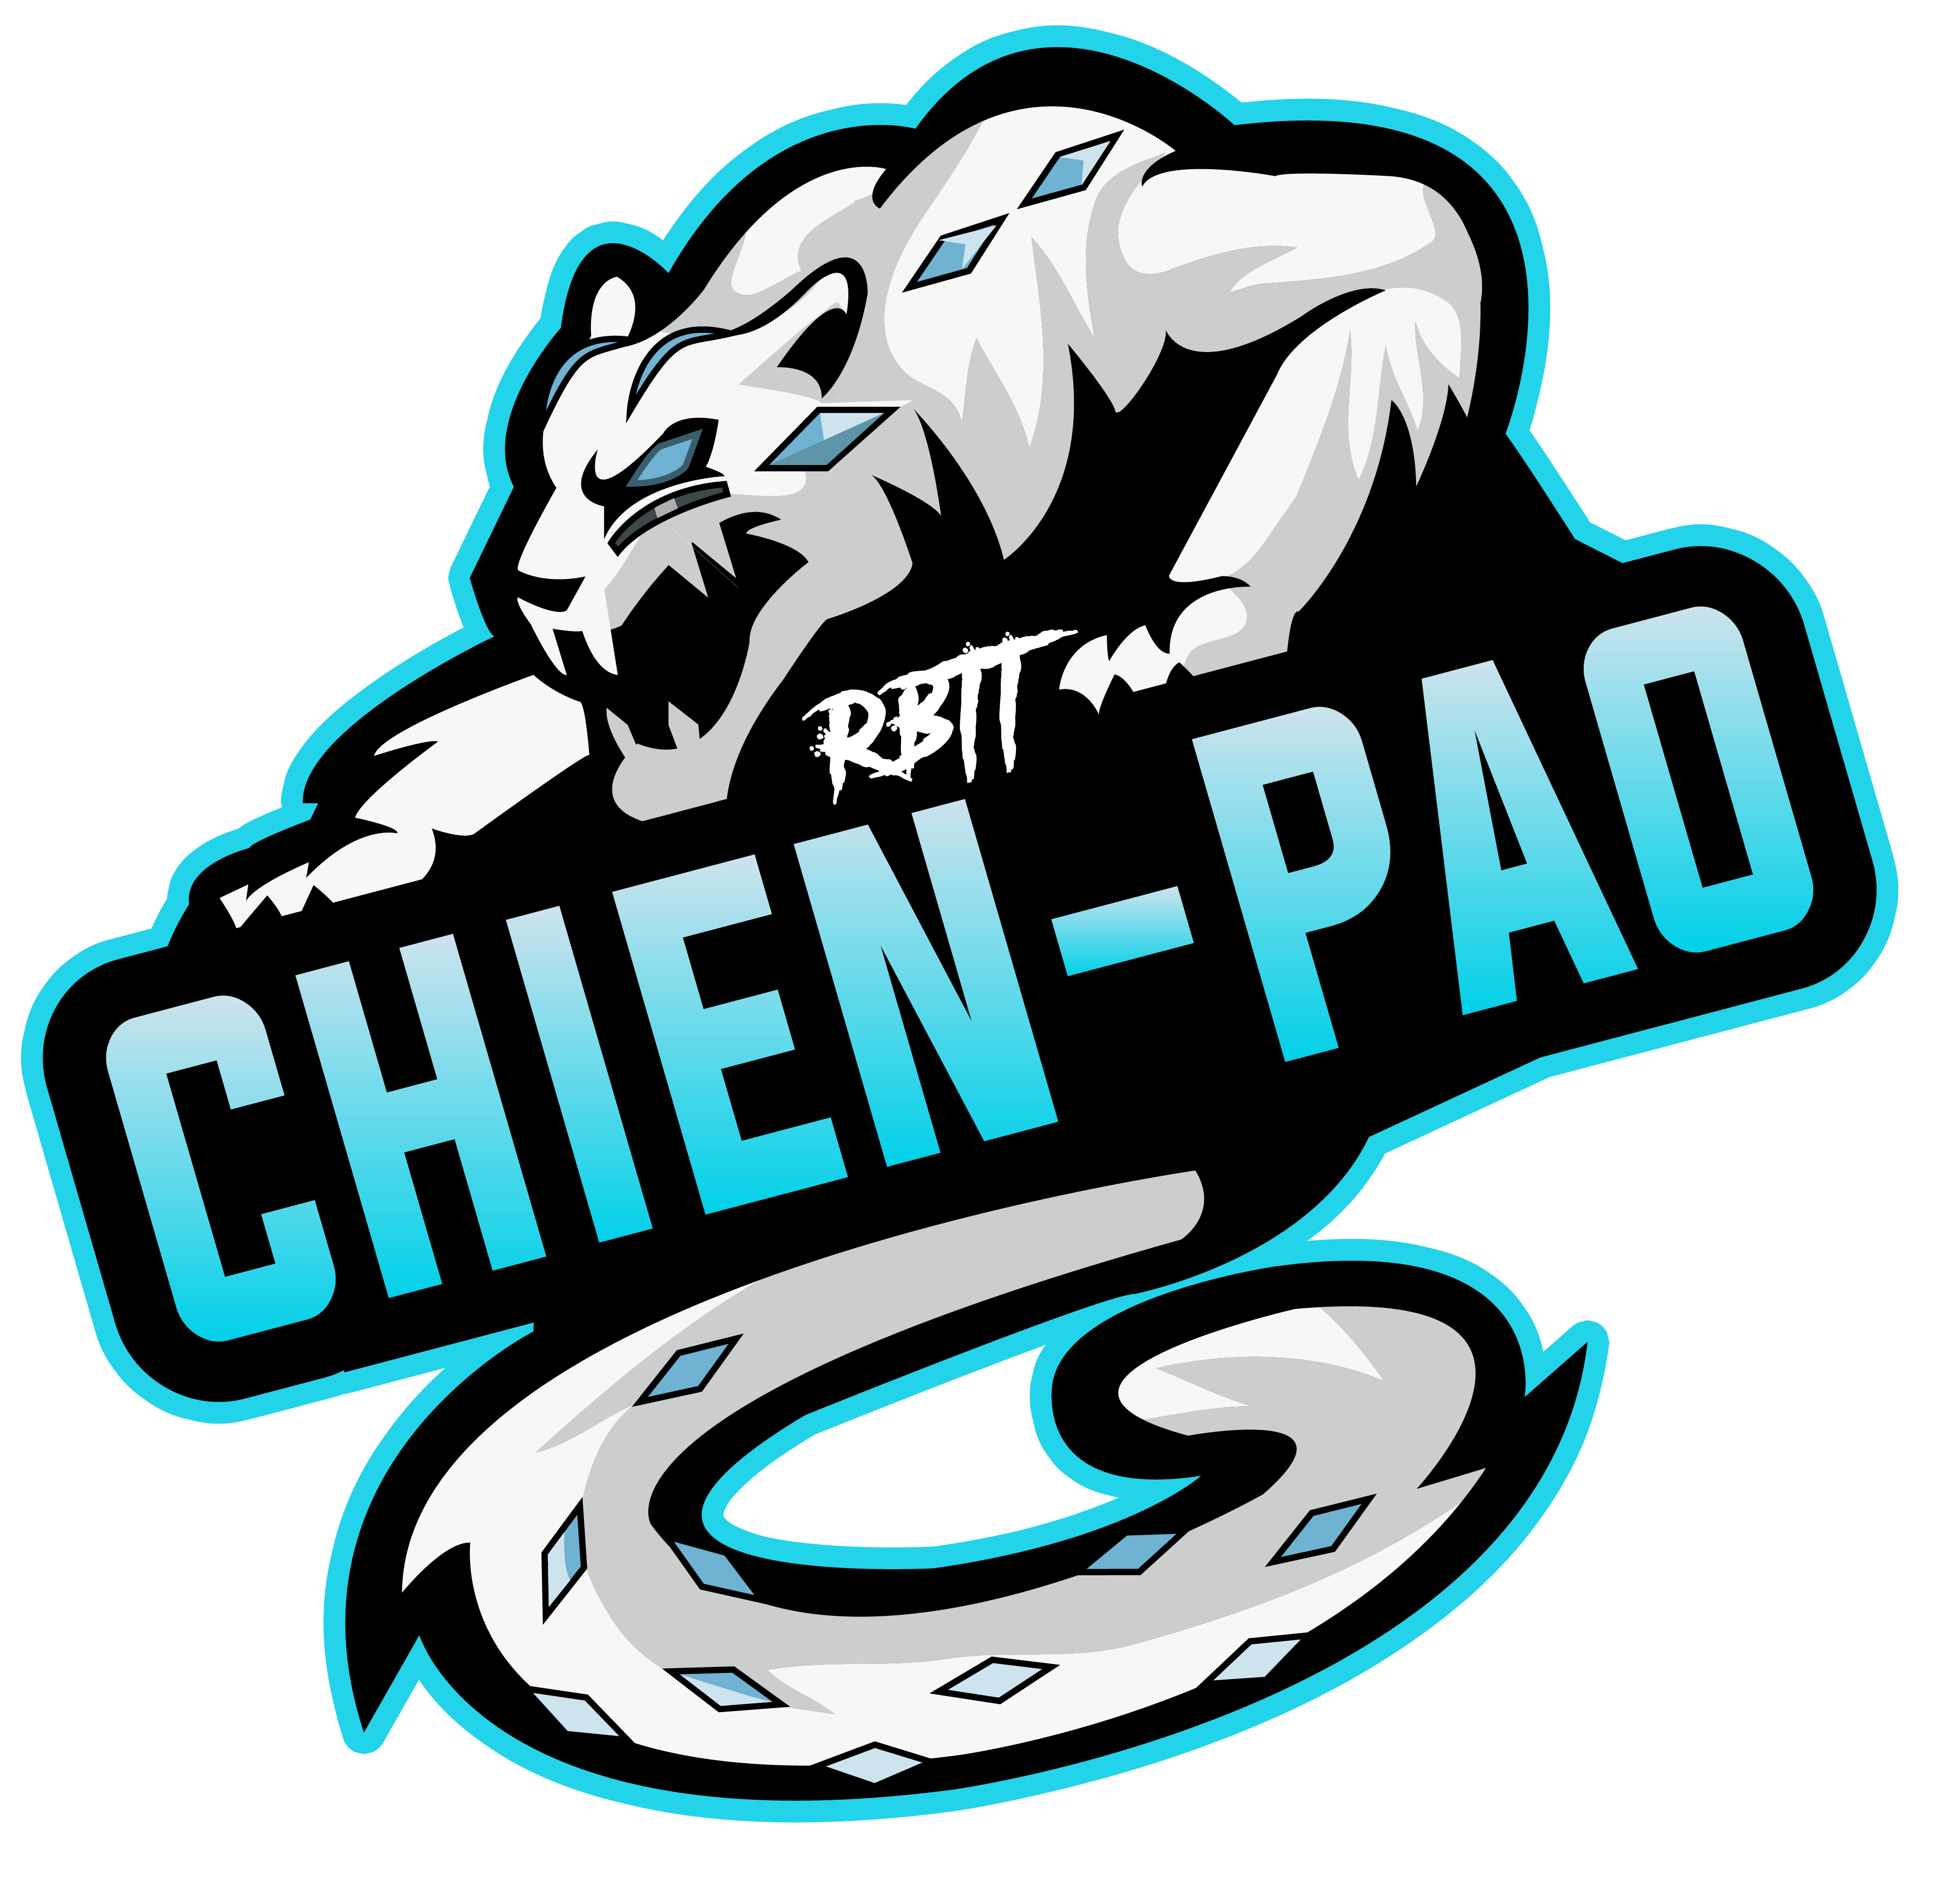 chien_pao_logo_final-1.png